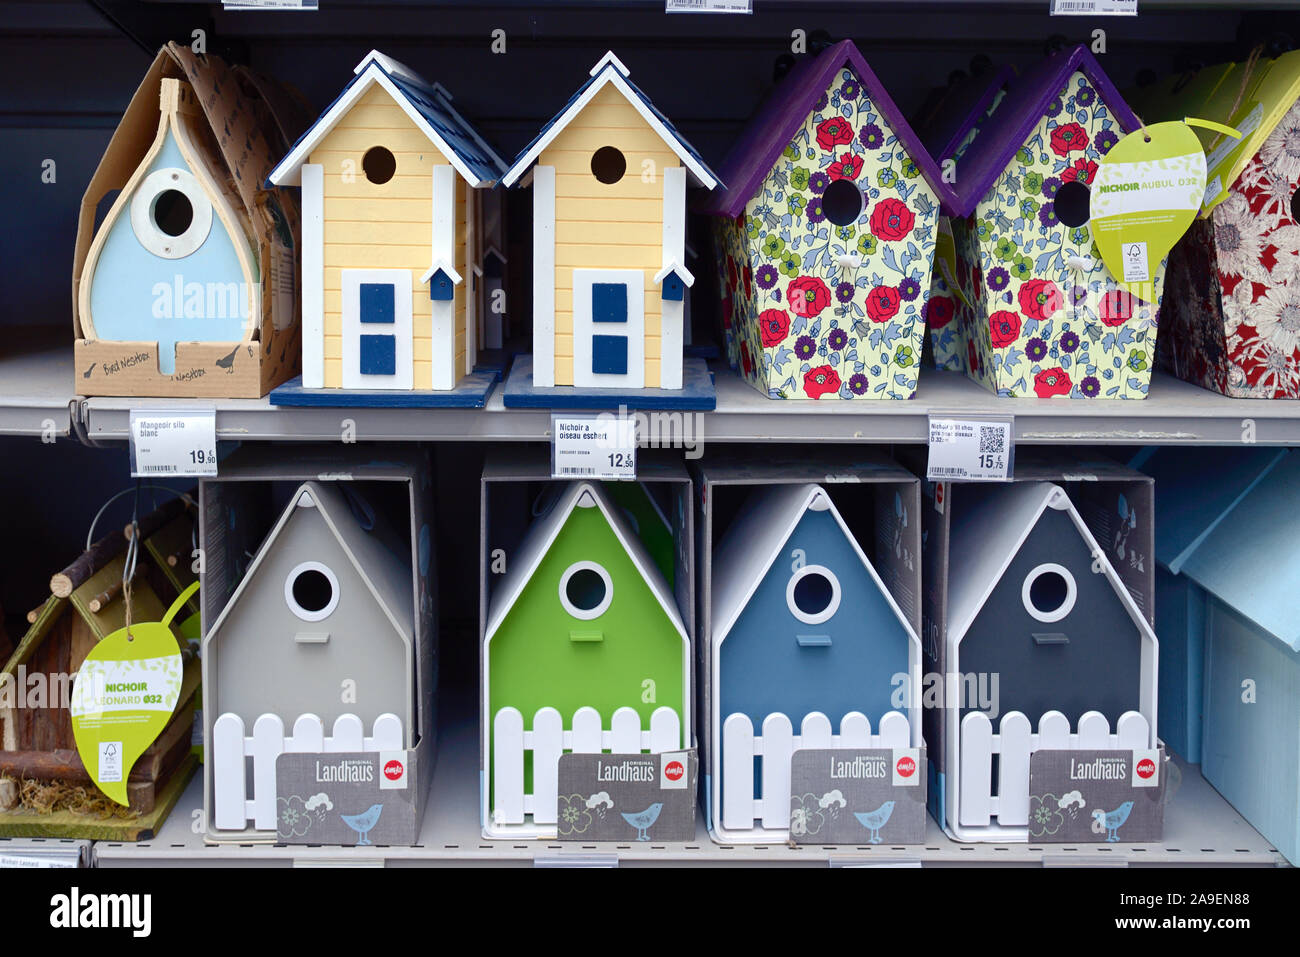 Display or Collection of Colourful Bird Boxes or Nesting Boxes for Sale in Shop, Store or Garden Centre Stock Photo